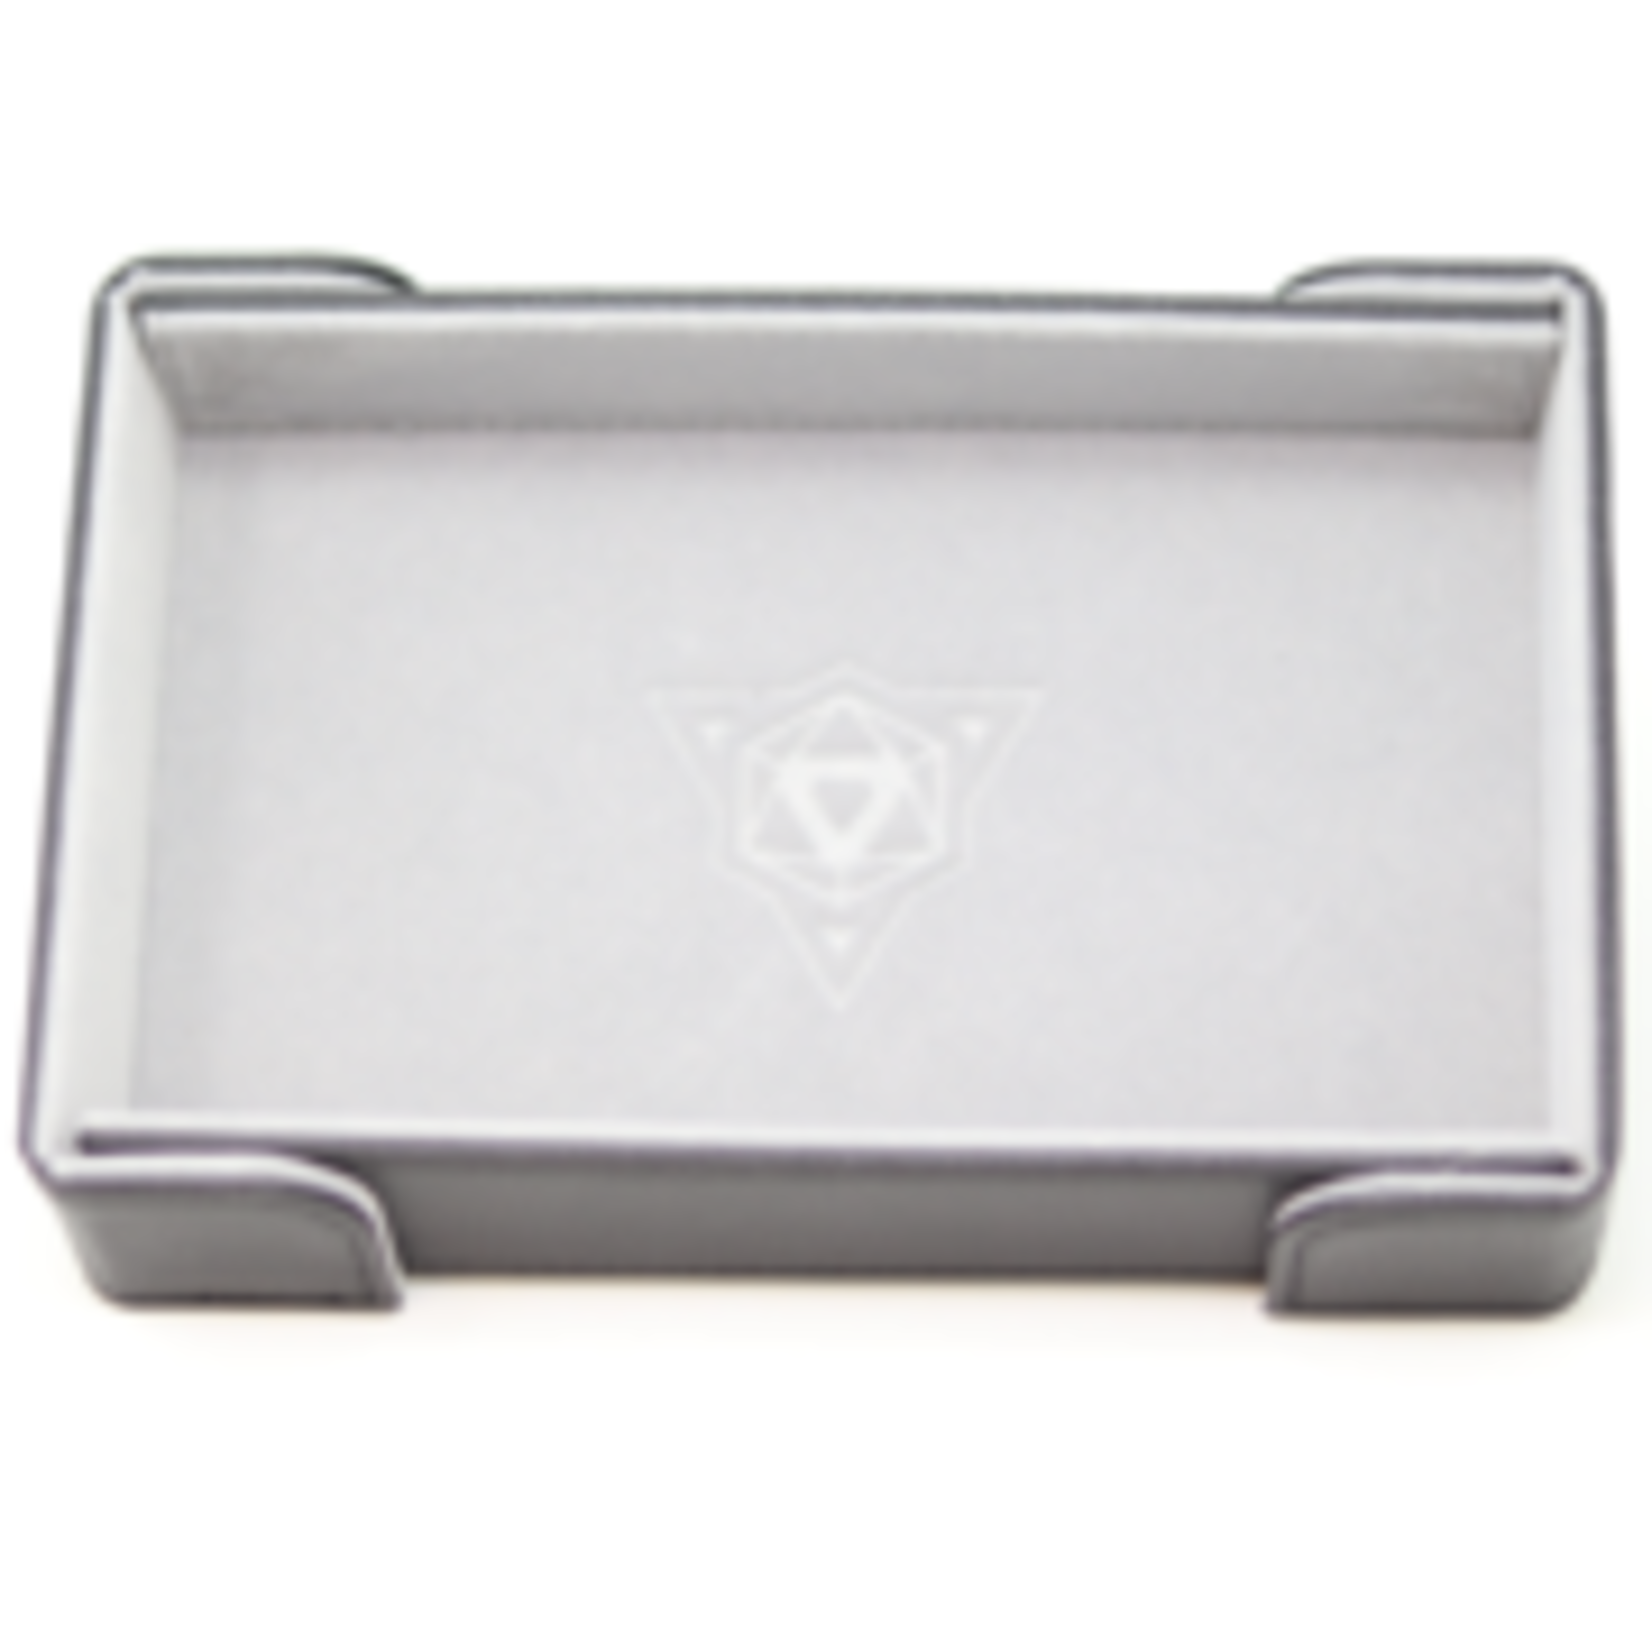 Die Hard Dice Die Hard - Magnetic Rectangle Folding Dice Tray - Gray